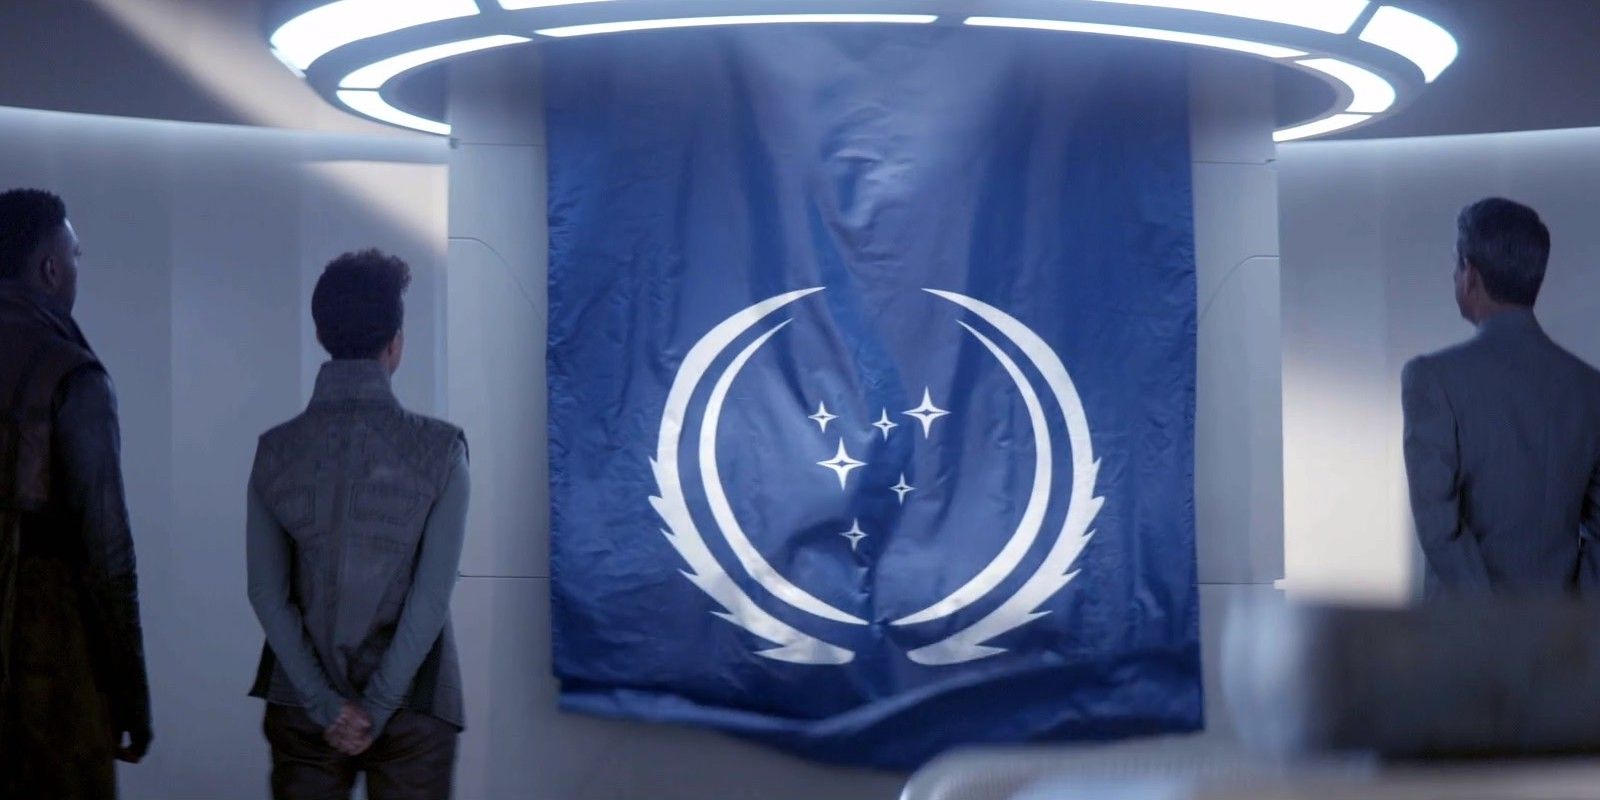 united federation of planets flag